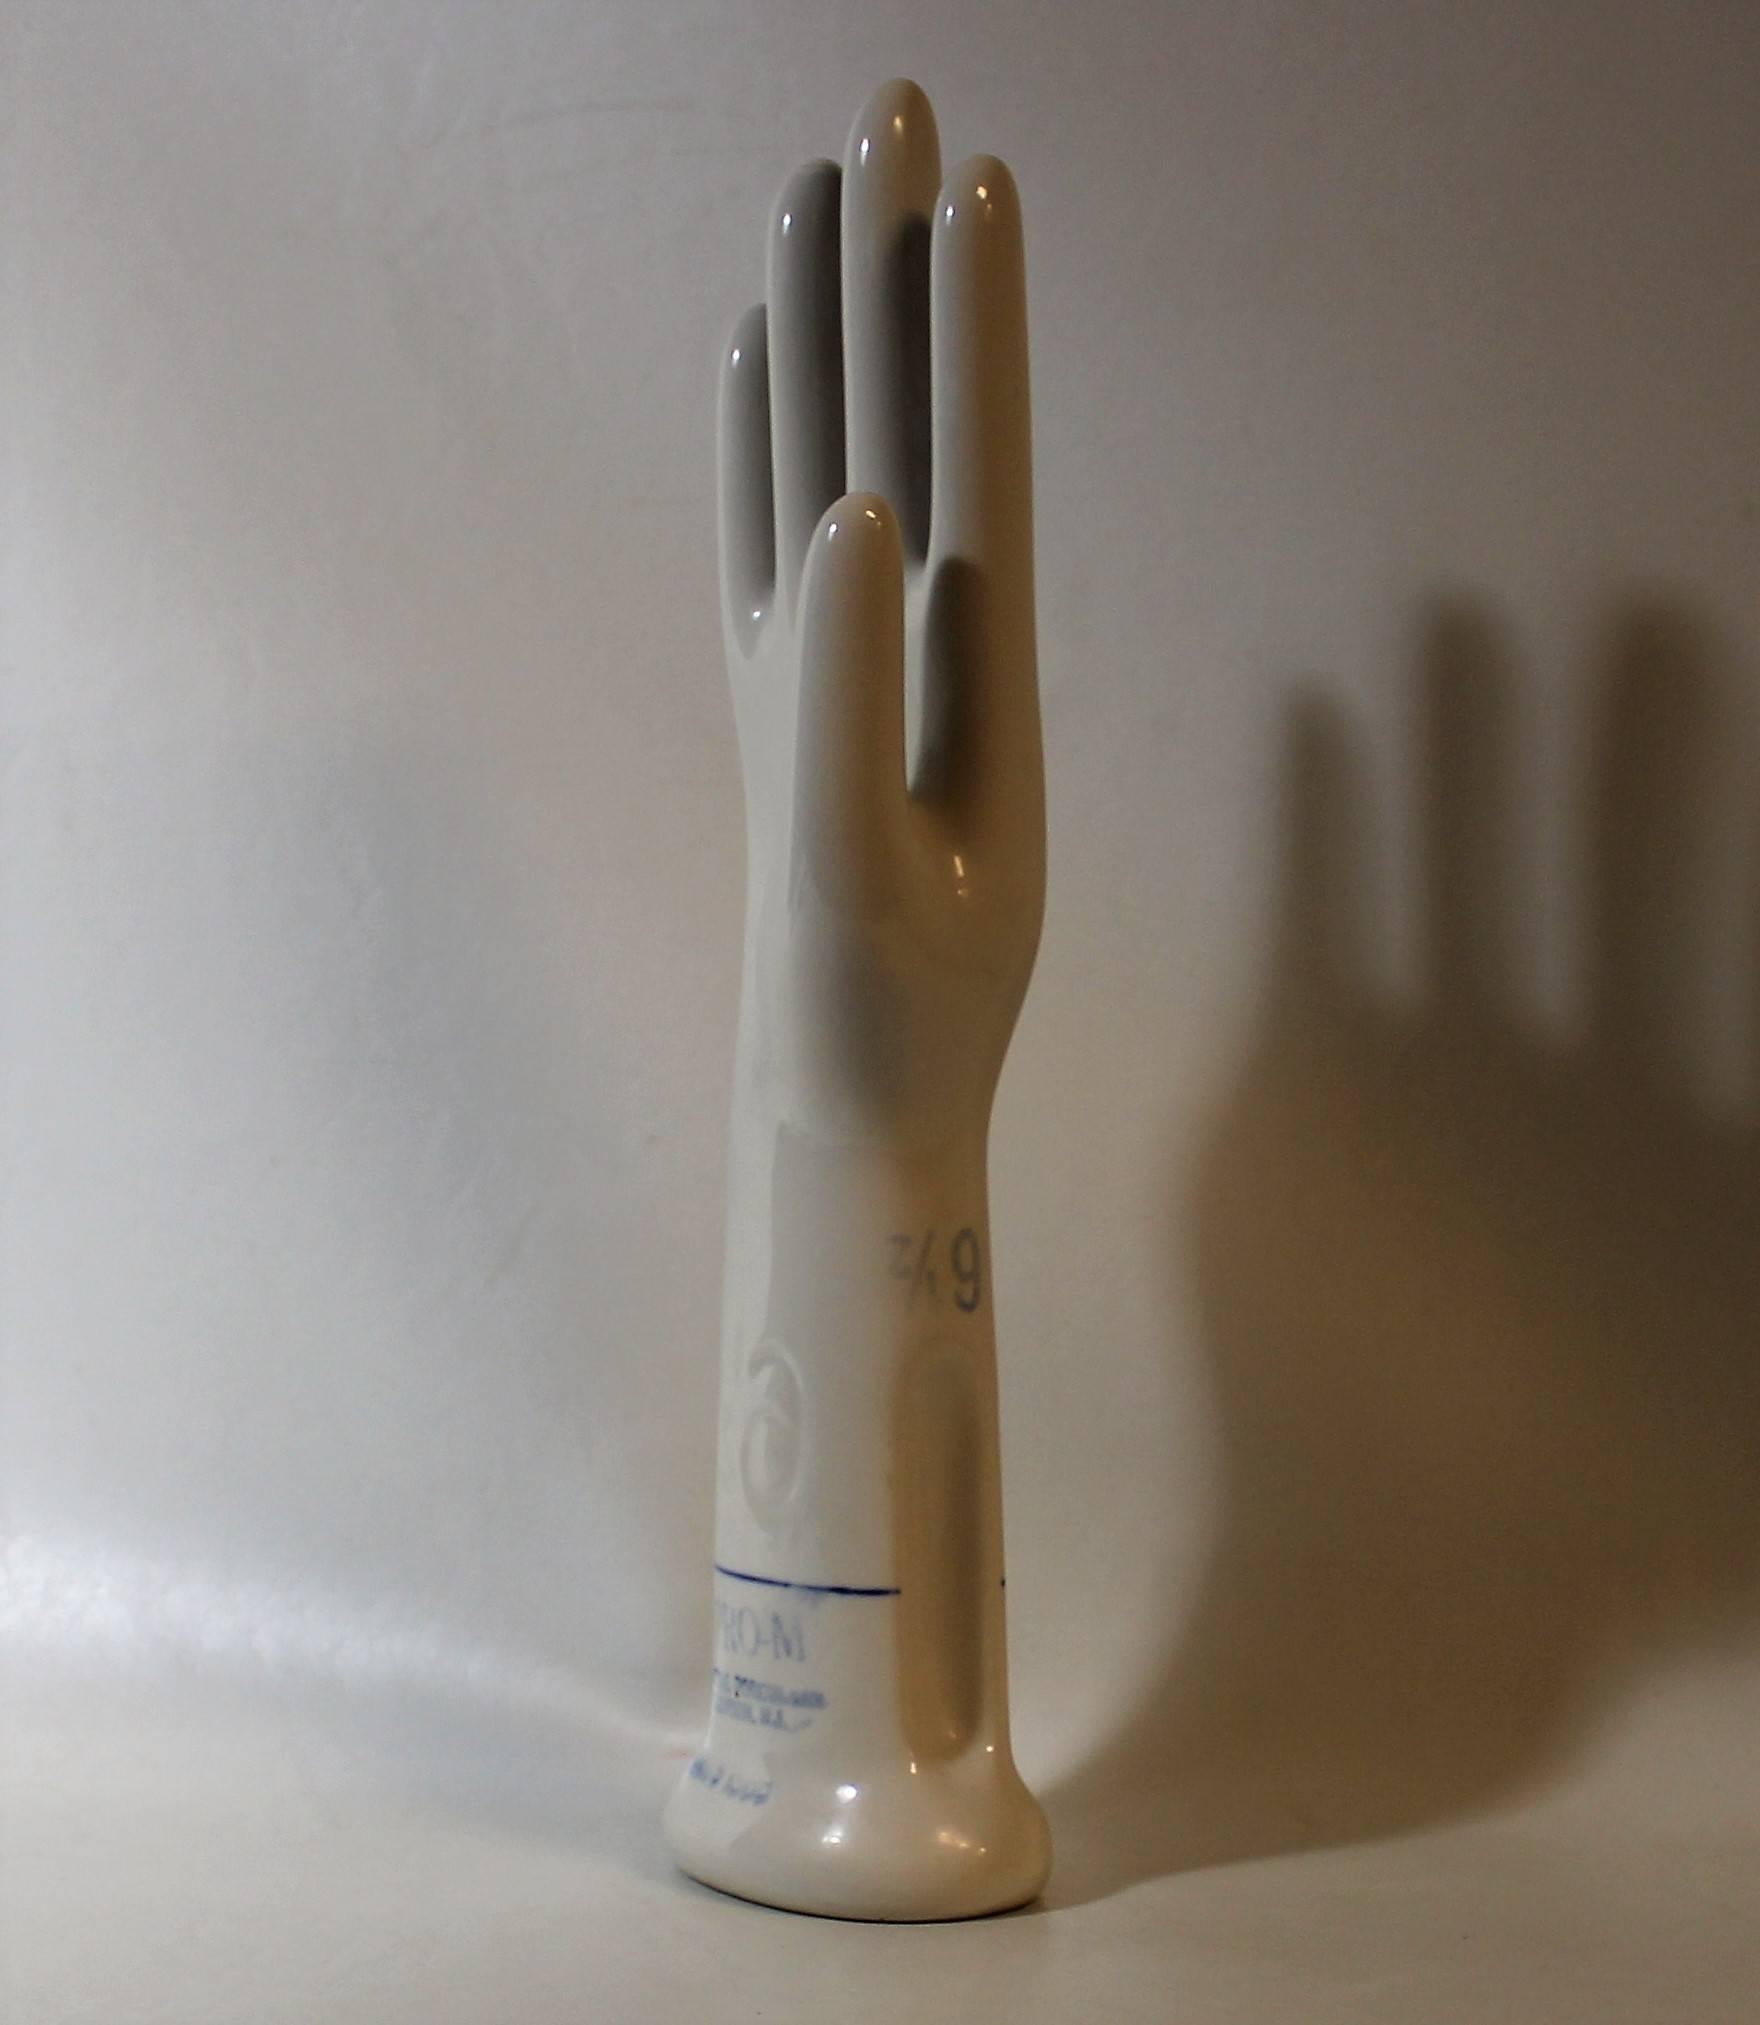 Industrial porcelain handmade to mold a size 6.5 glove. It's made of smooth white porcelain marked with blue lines and print. This unit would be a great display for jewelry or an interesting Industrial style sculpture for any room with an eclectic